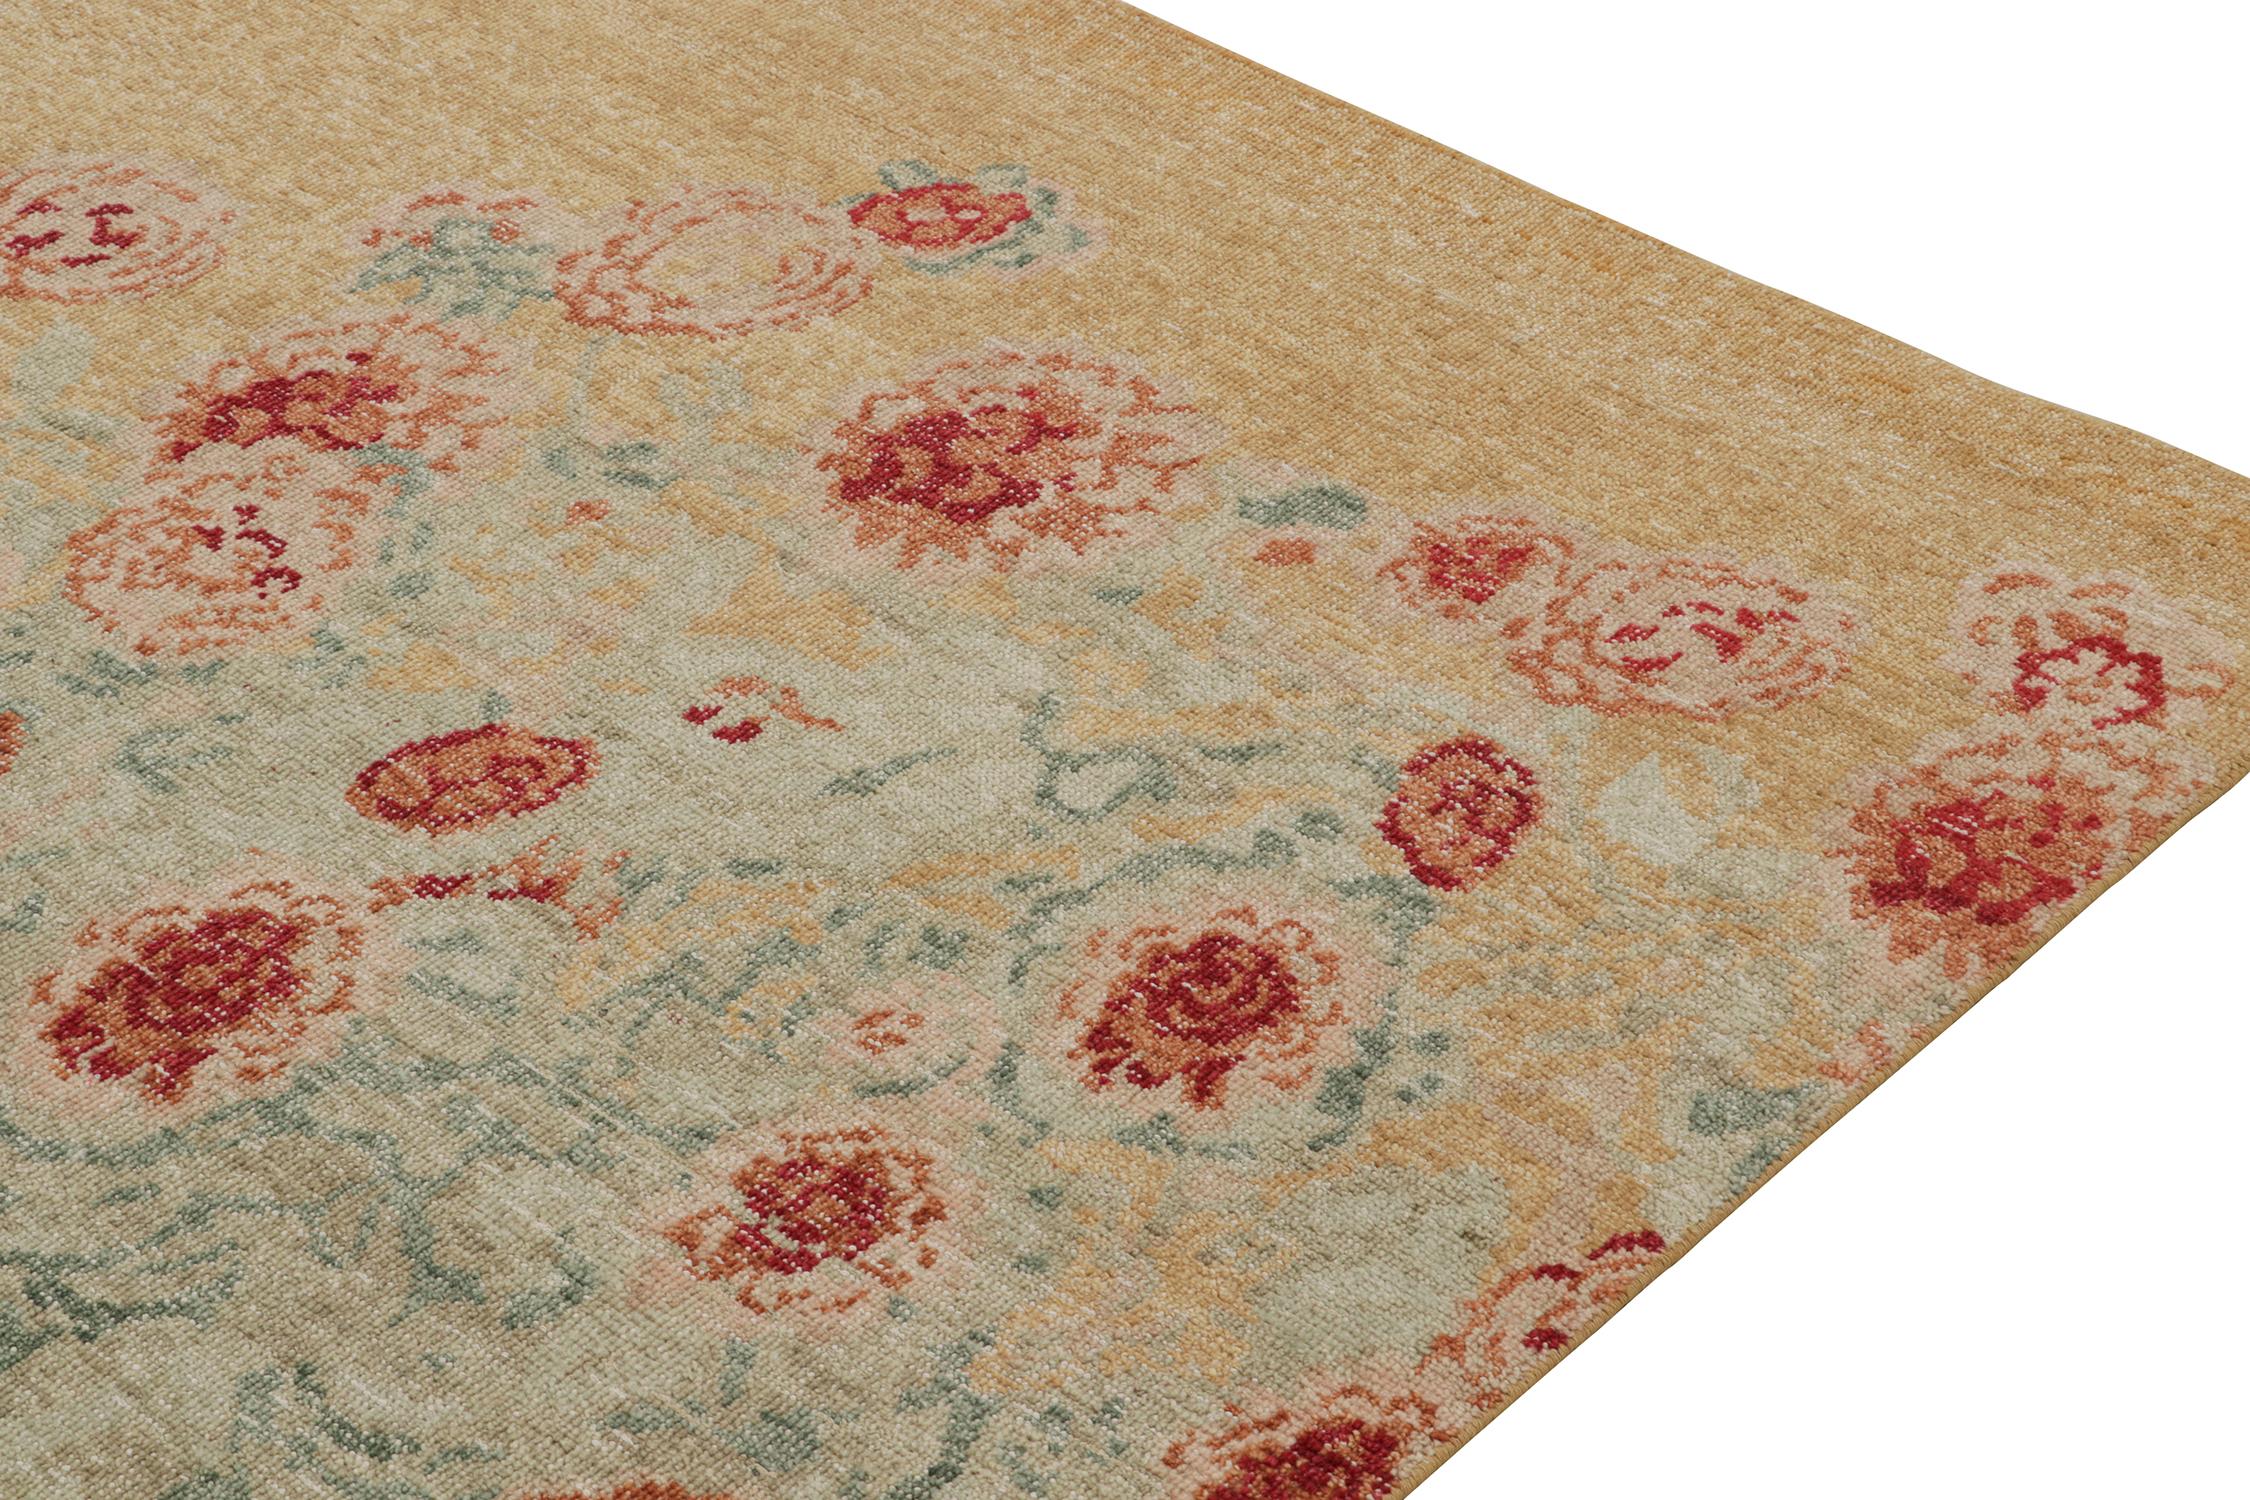 Hand-Knotted Rug & Kilim’s Distressed style Transitional rug in Polychromatic Floral Patterns For Sale